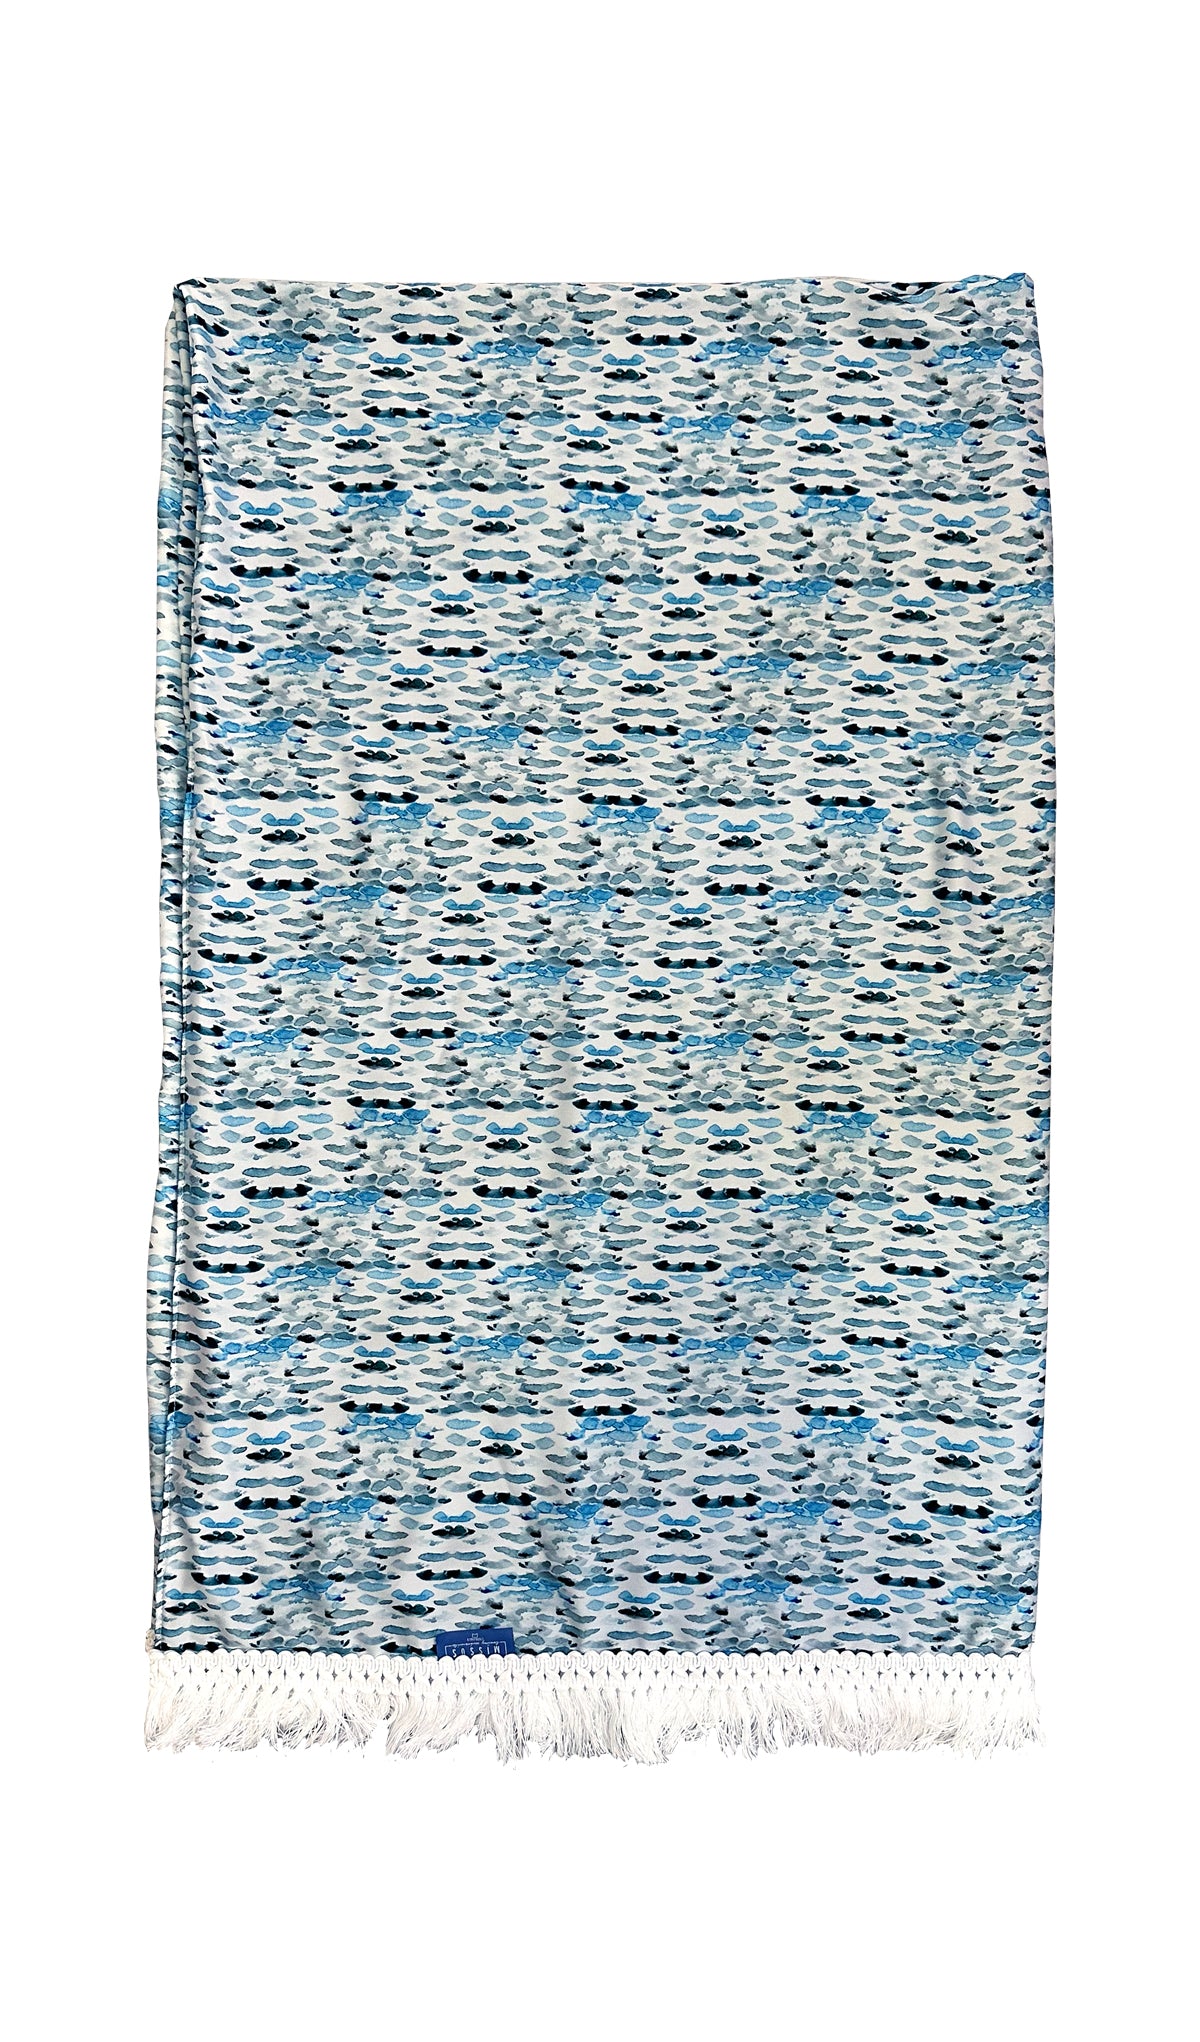 BEACH TOWEL S3 (OUT OF STOCK)